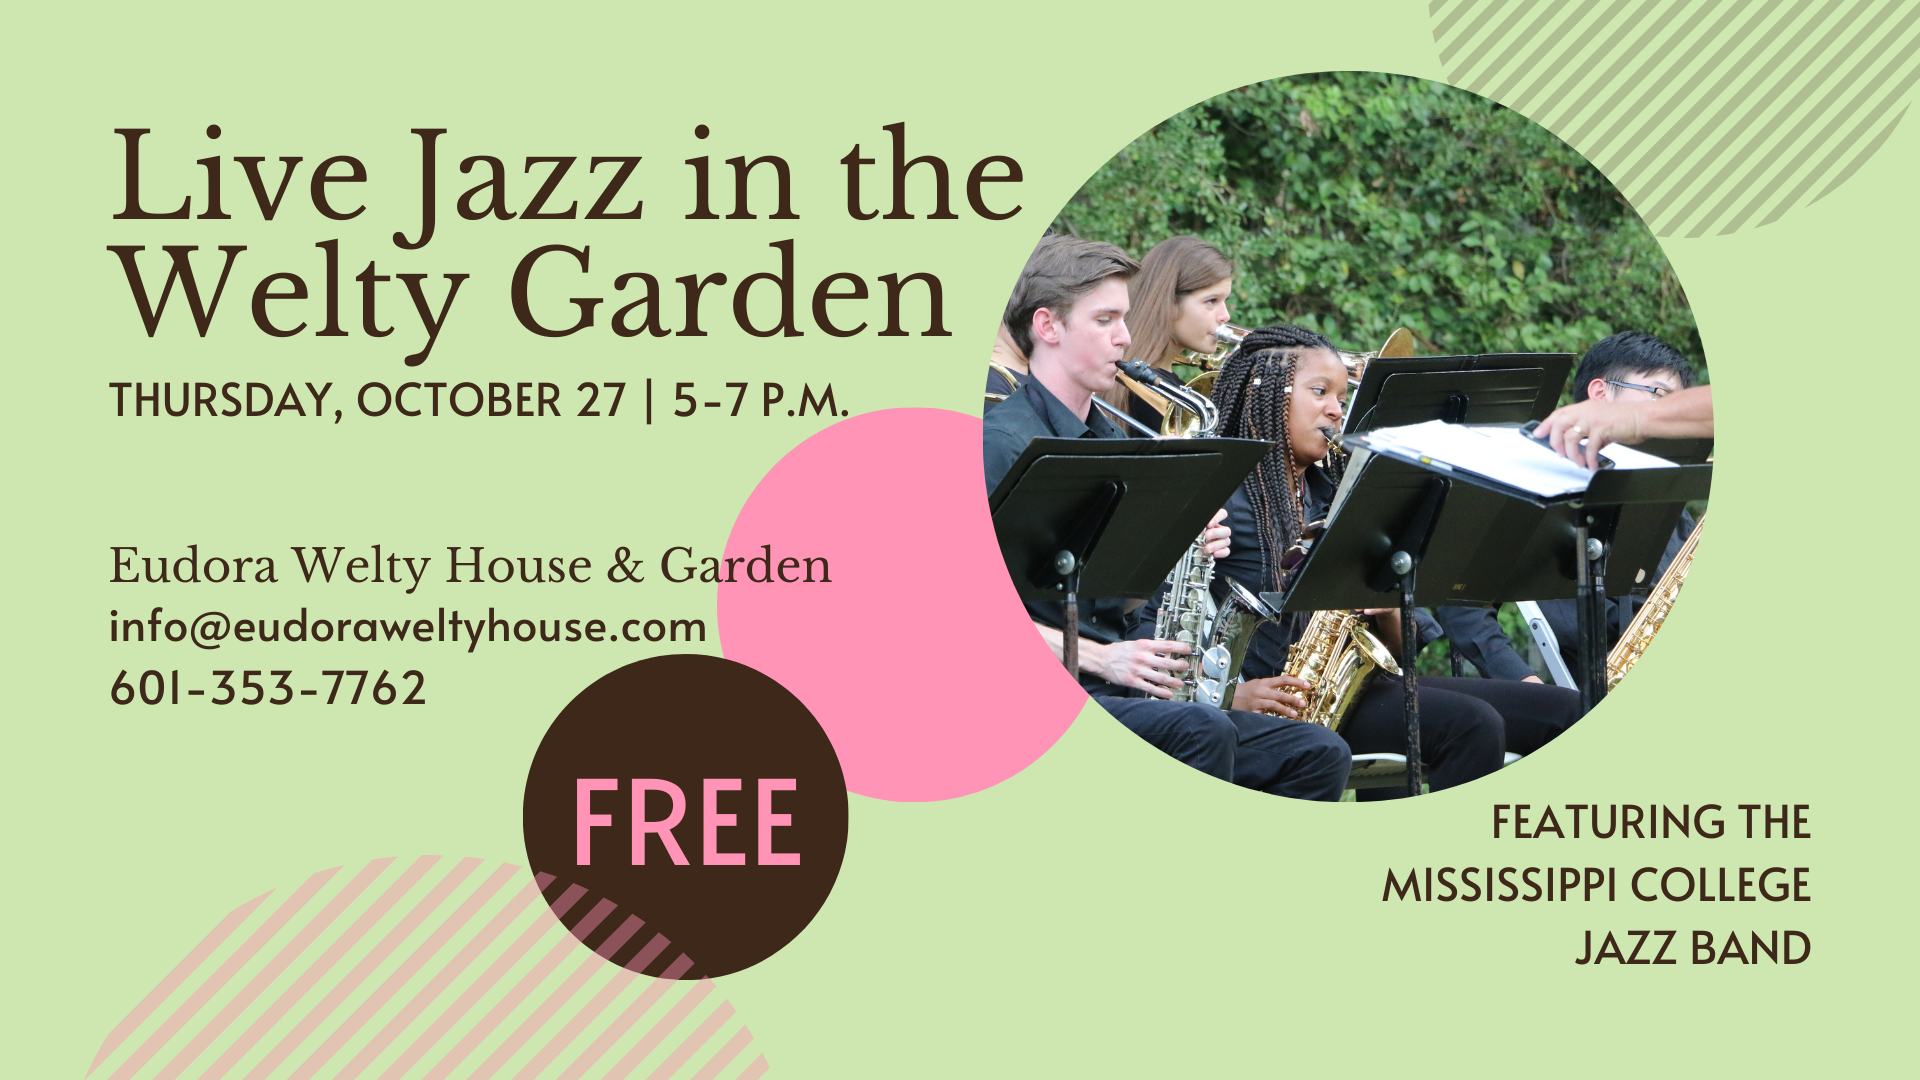 Event graphic for Live Jazz in the Welty Garden text on green background with image of musicians playing instruments outdoors